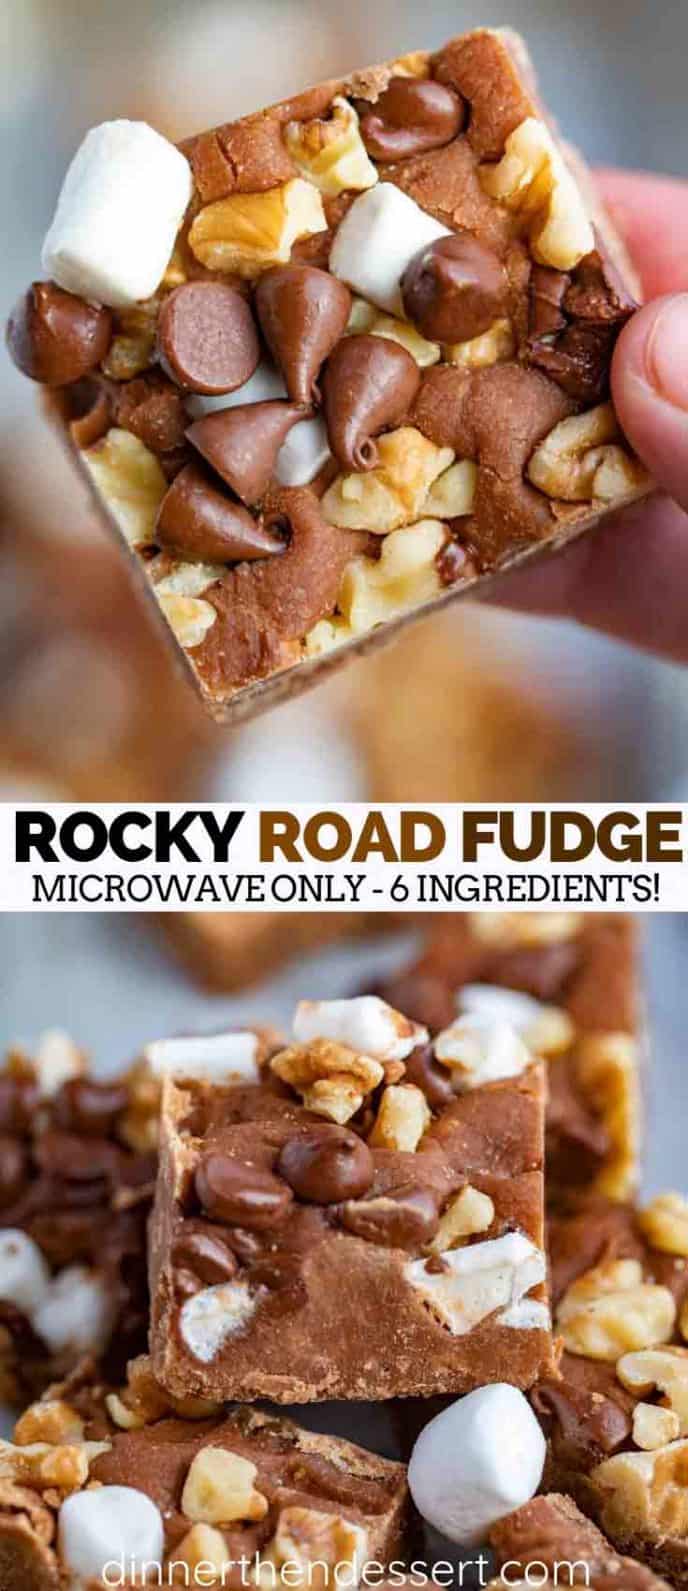 Easy Chocolate Fudge with marshmallows, walnuts and chocolate chips